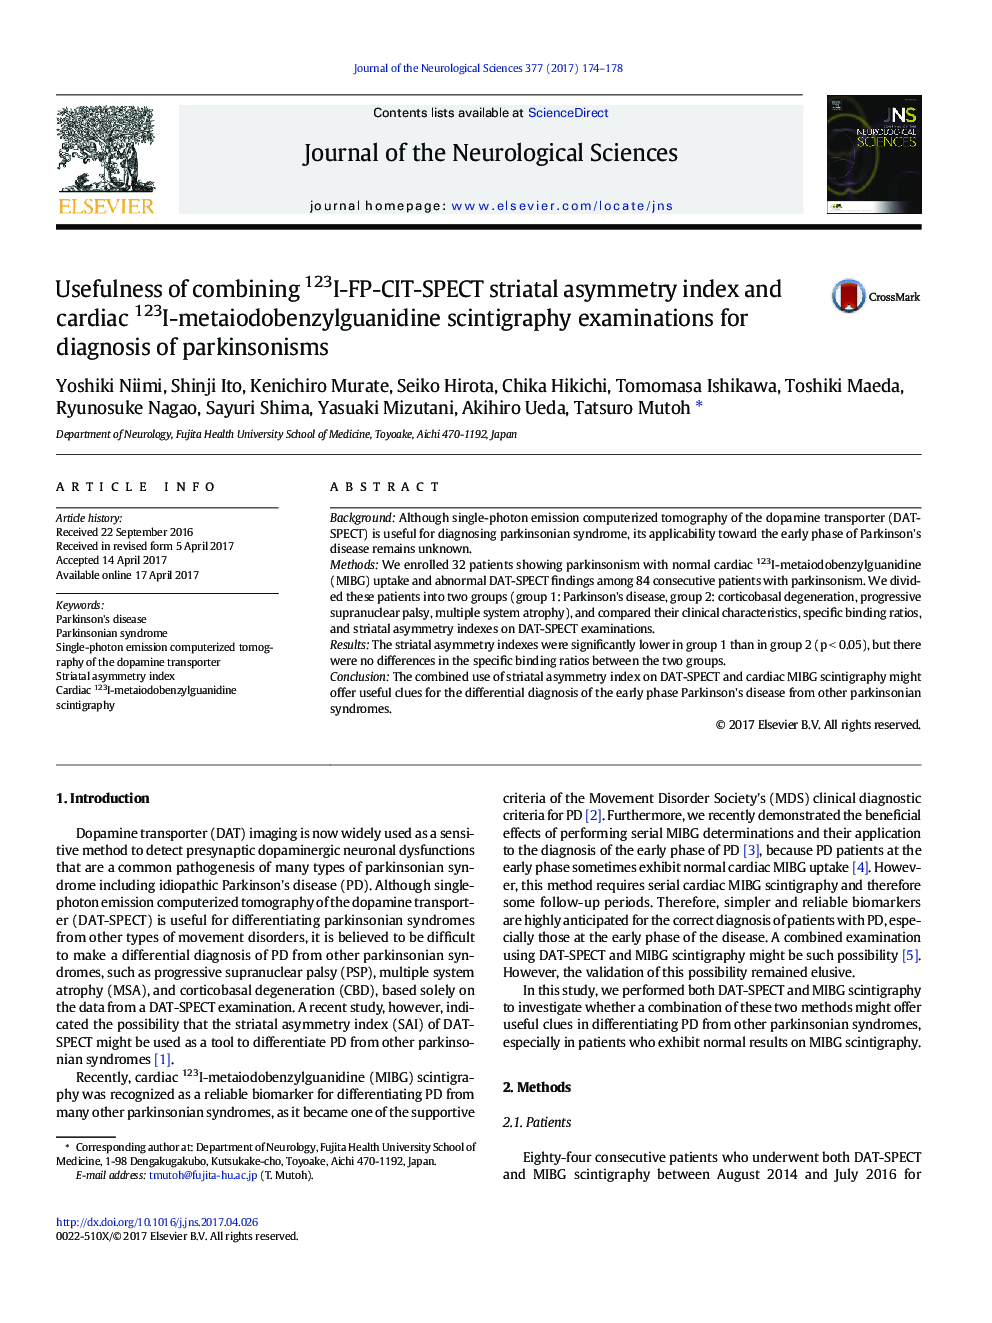 Usefulness of combining 123I-FP-CIT-SPECT striatal asymmetry index and cardiac 123I-metaiodobenzylguanidine scintigraphy examinations for diagnosis of parkinsonisms